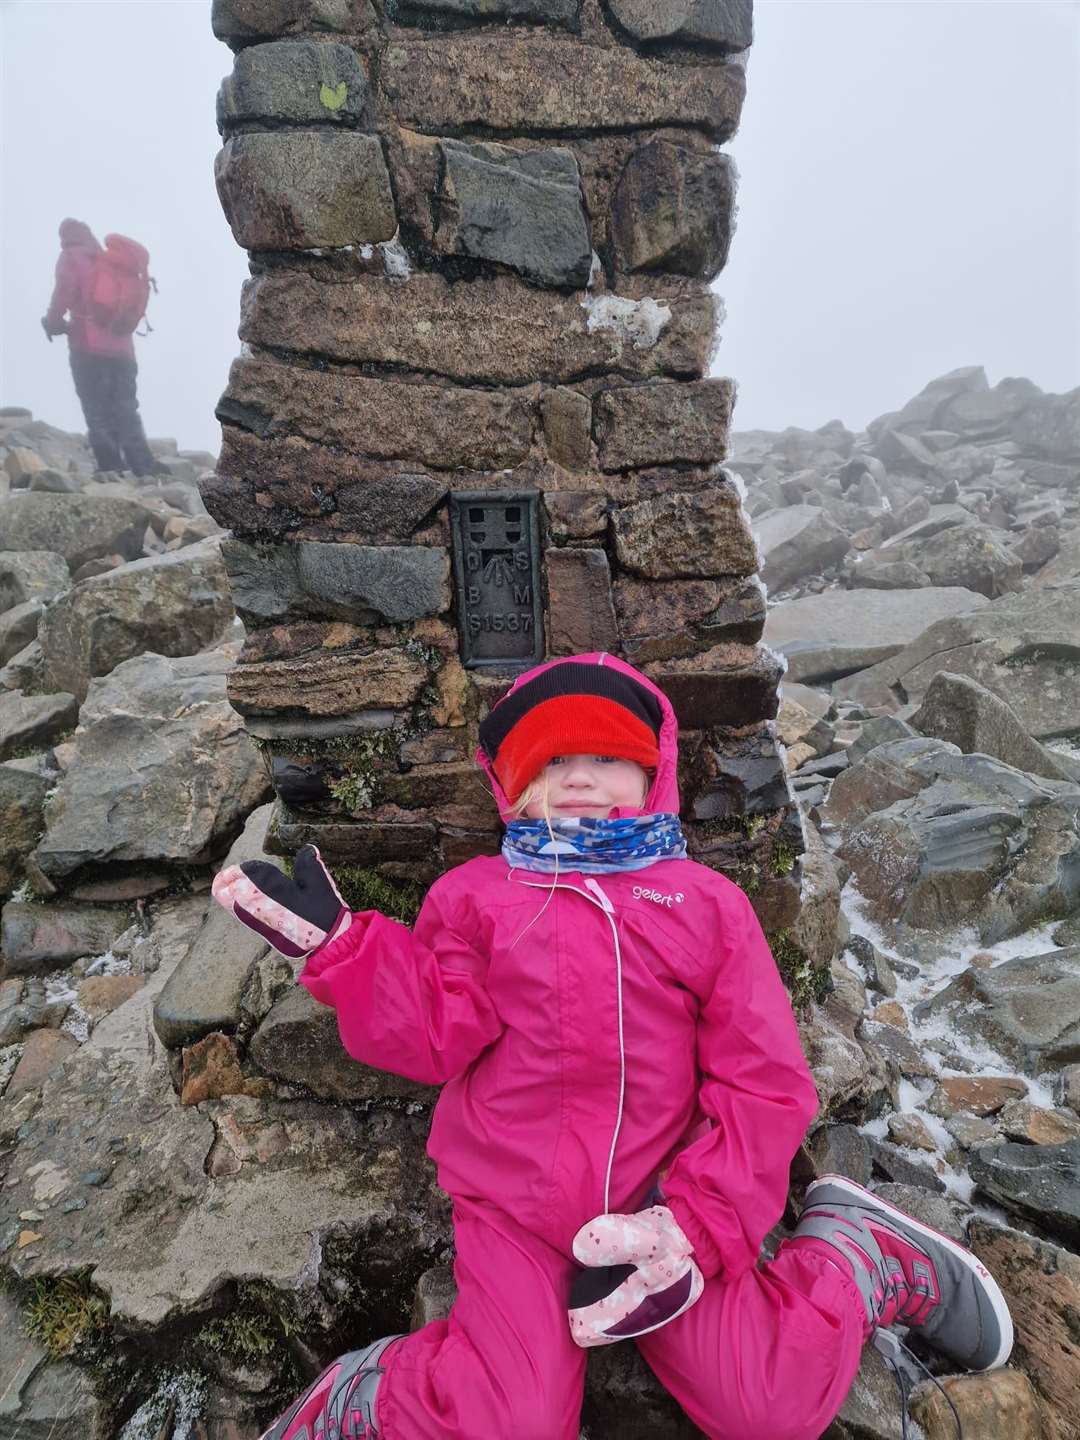 Seren reaching the top of Scafell Pike despite extreme winter conditions (Glyn Price/Just Giving)